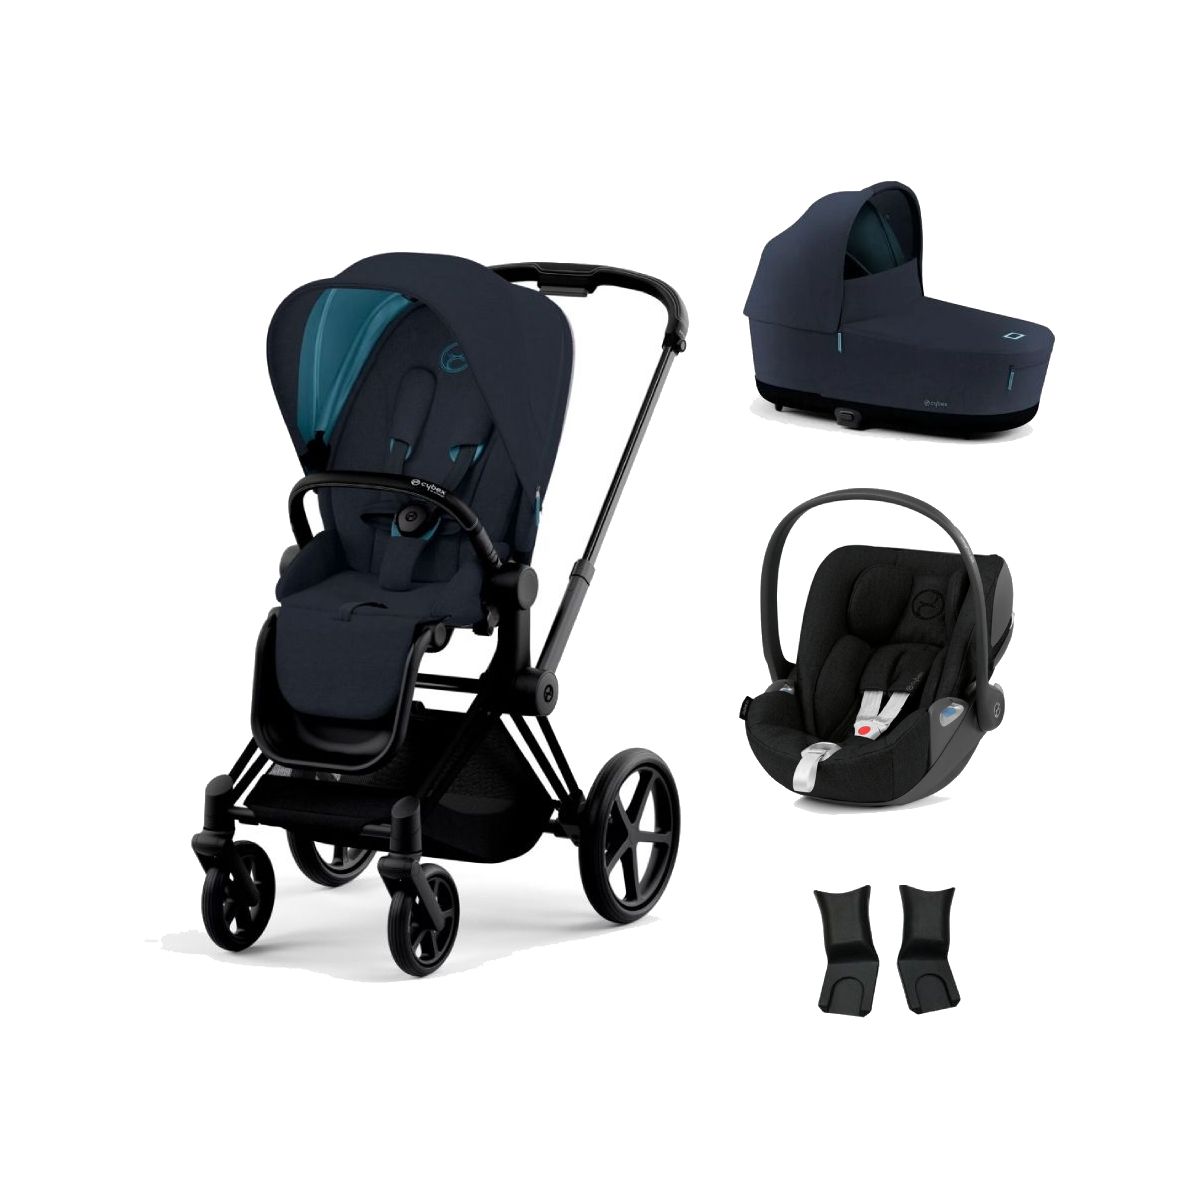 Cybex Priam Black Pushchair with Lux Carry Cot & Cloud Z Car Seat